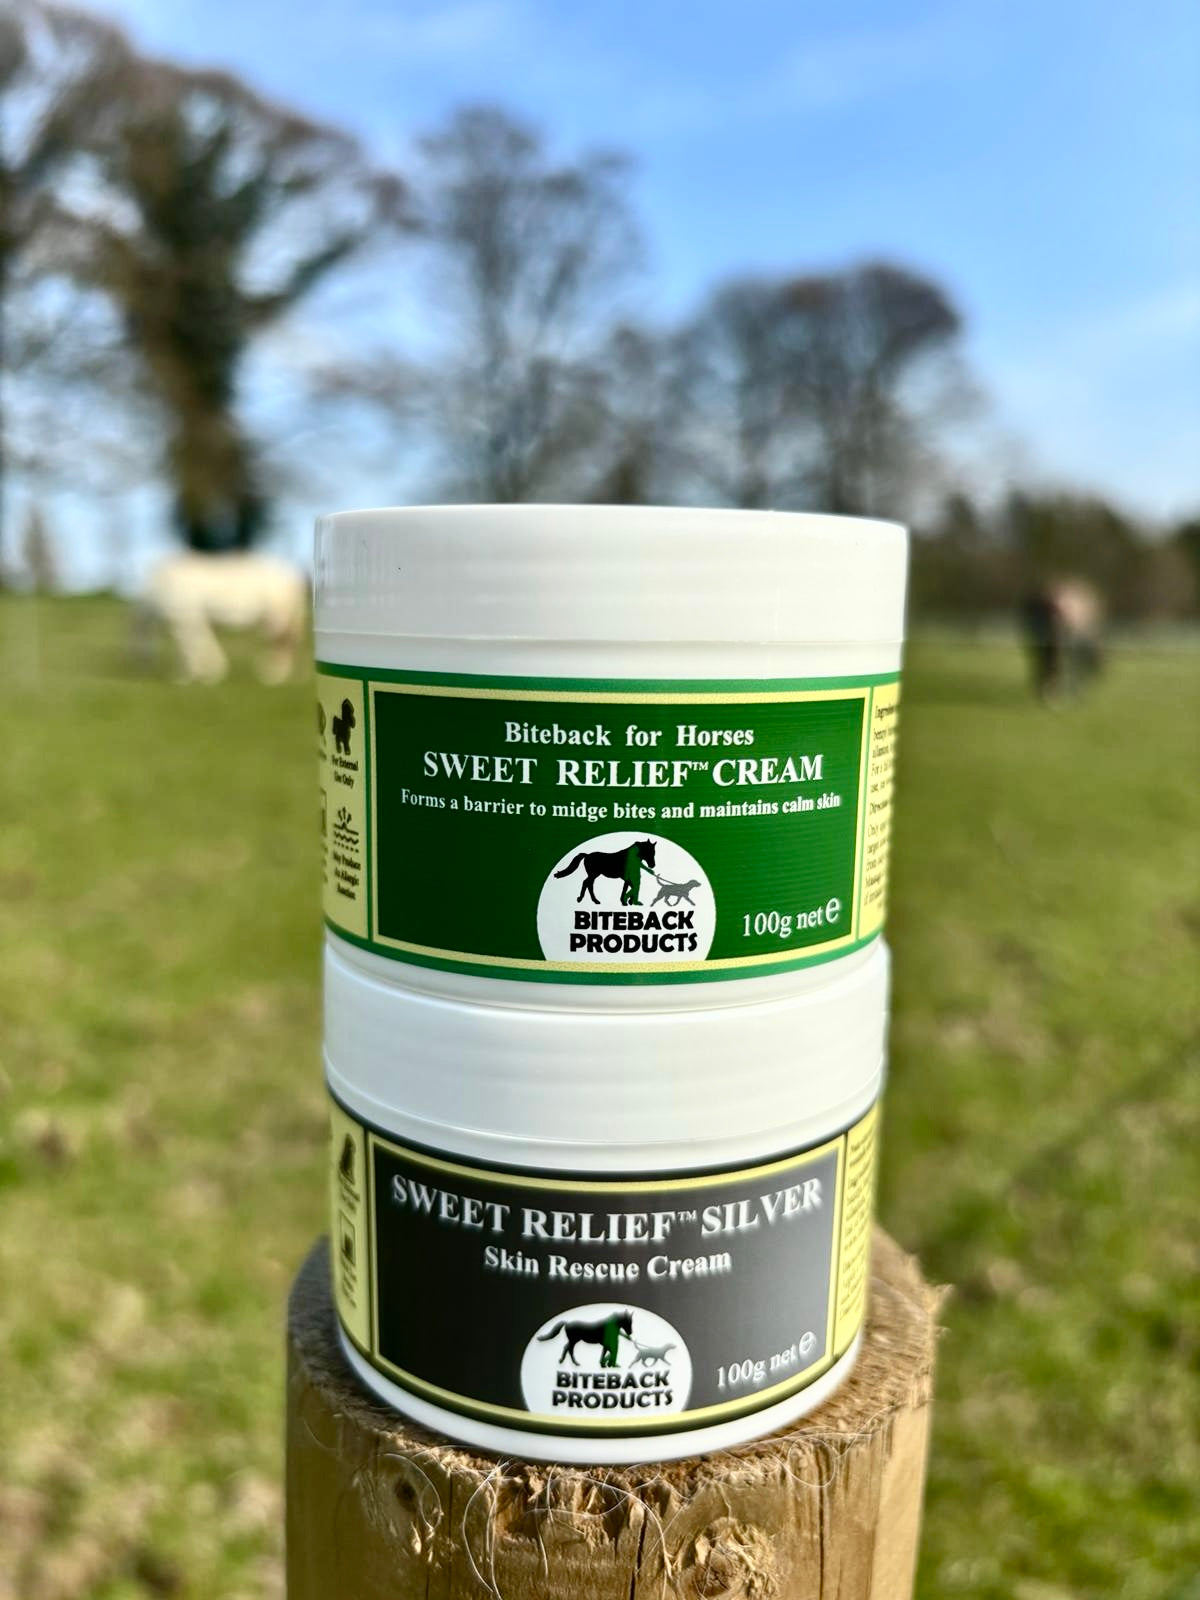 'Sweet Relief'™ Cream for Horses Sample Duo: 2 x 100g pots